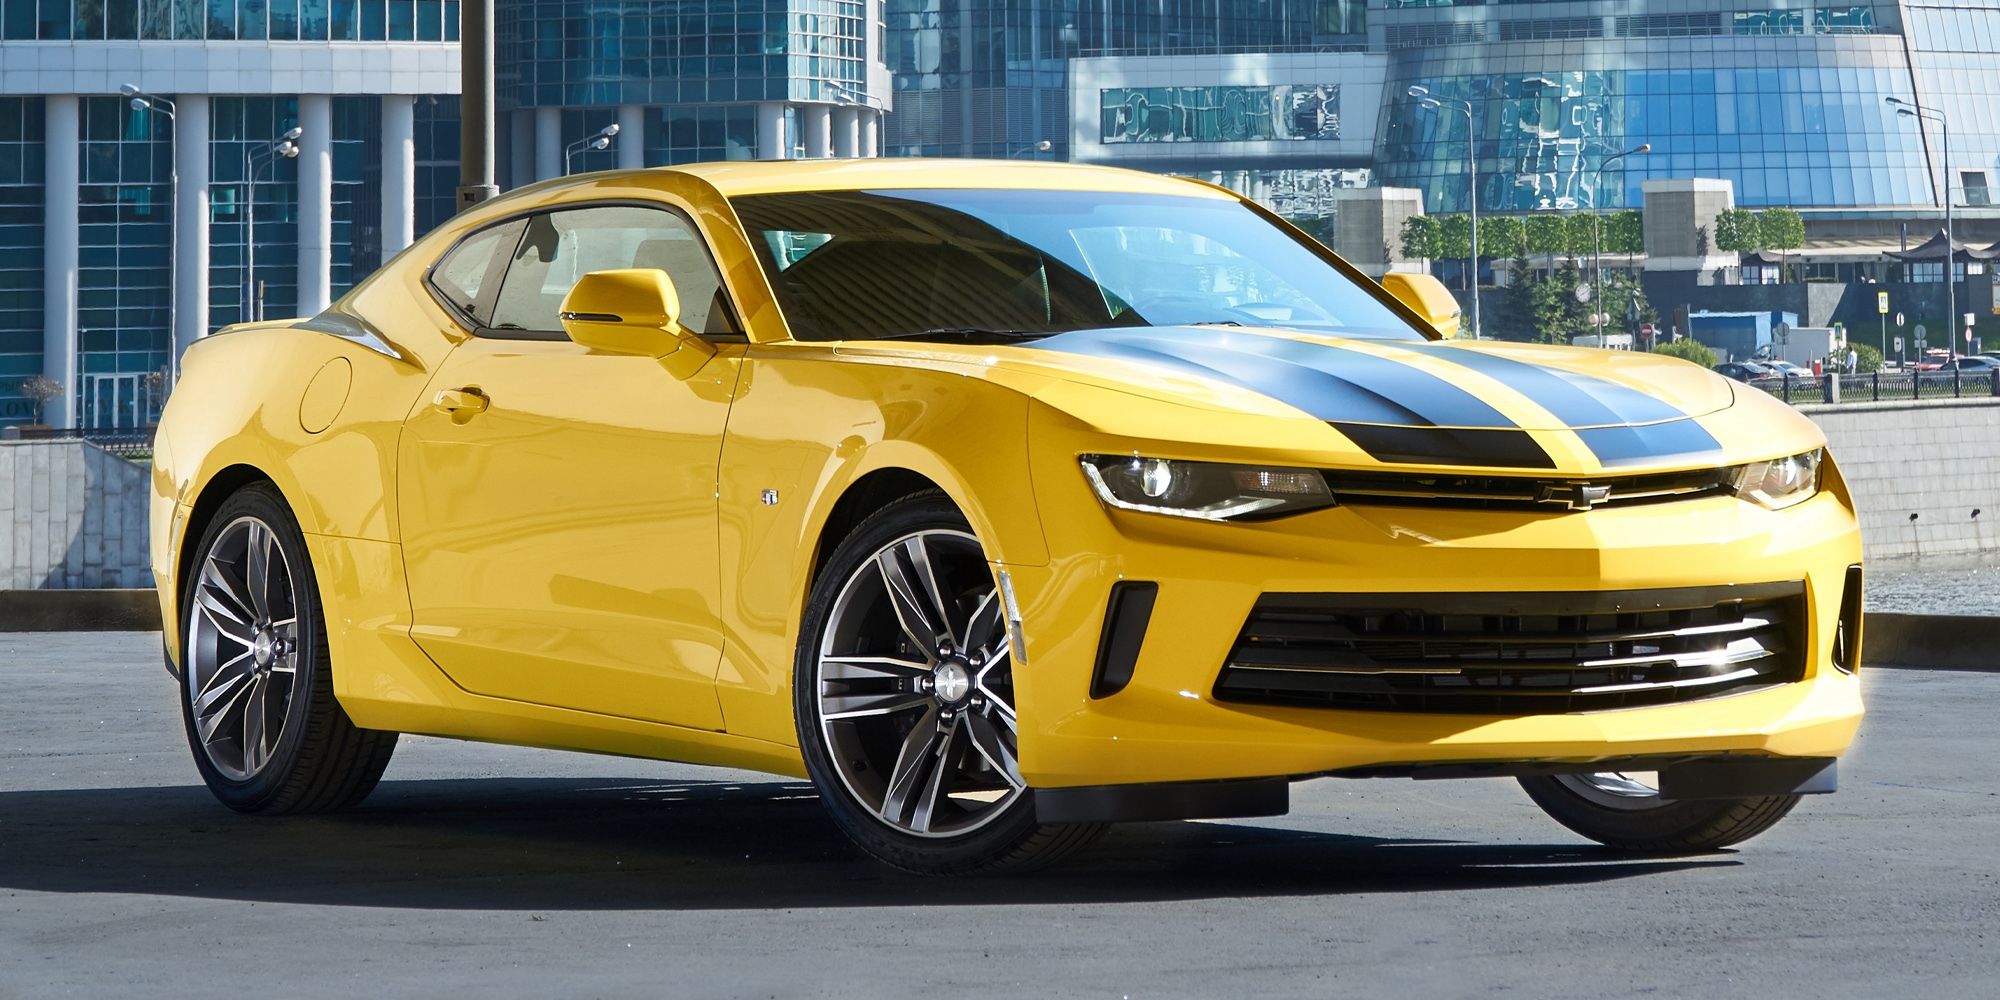 The front of a yellow Camaro